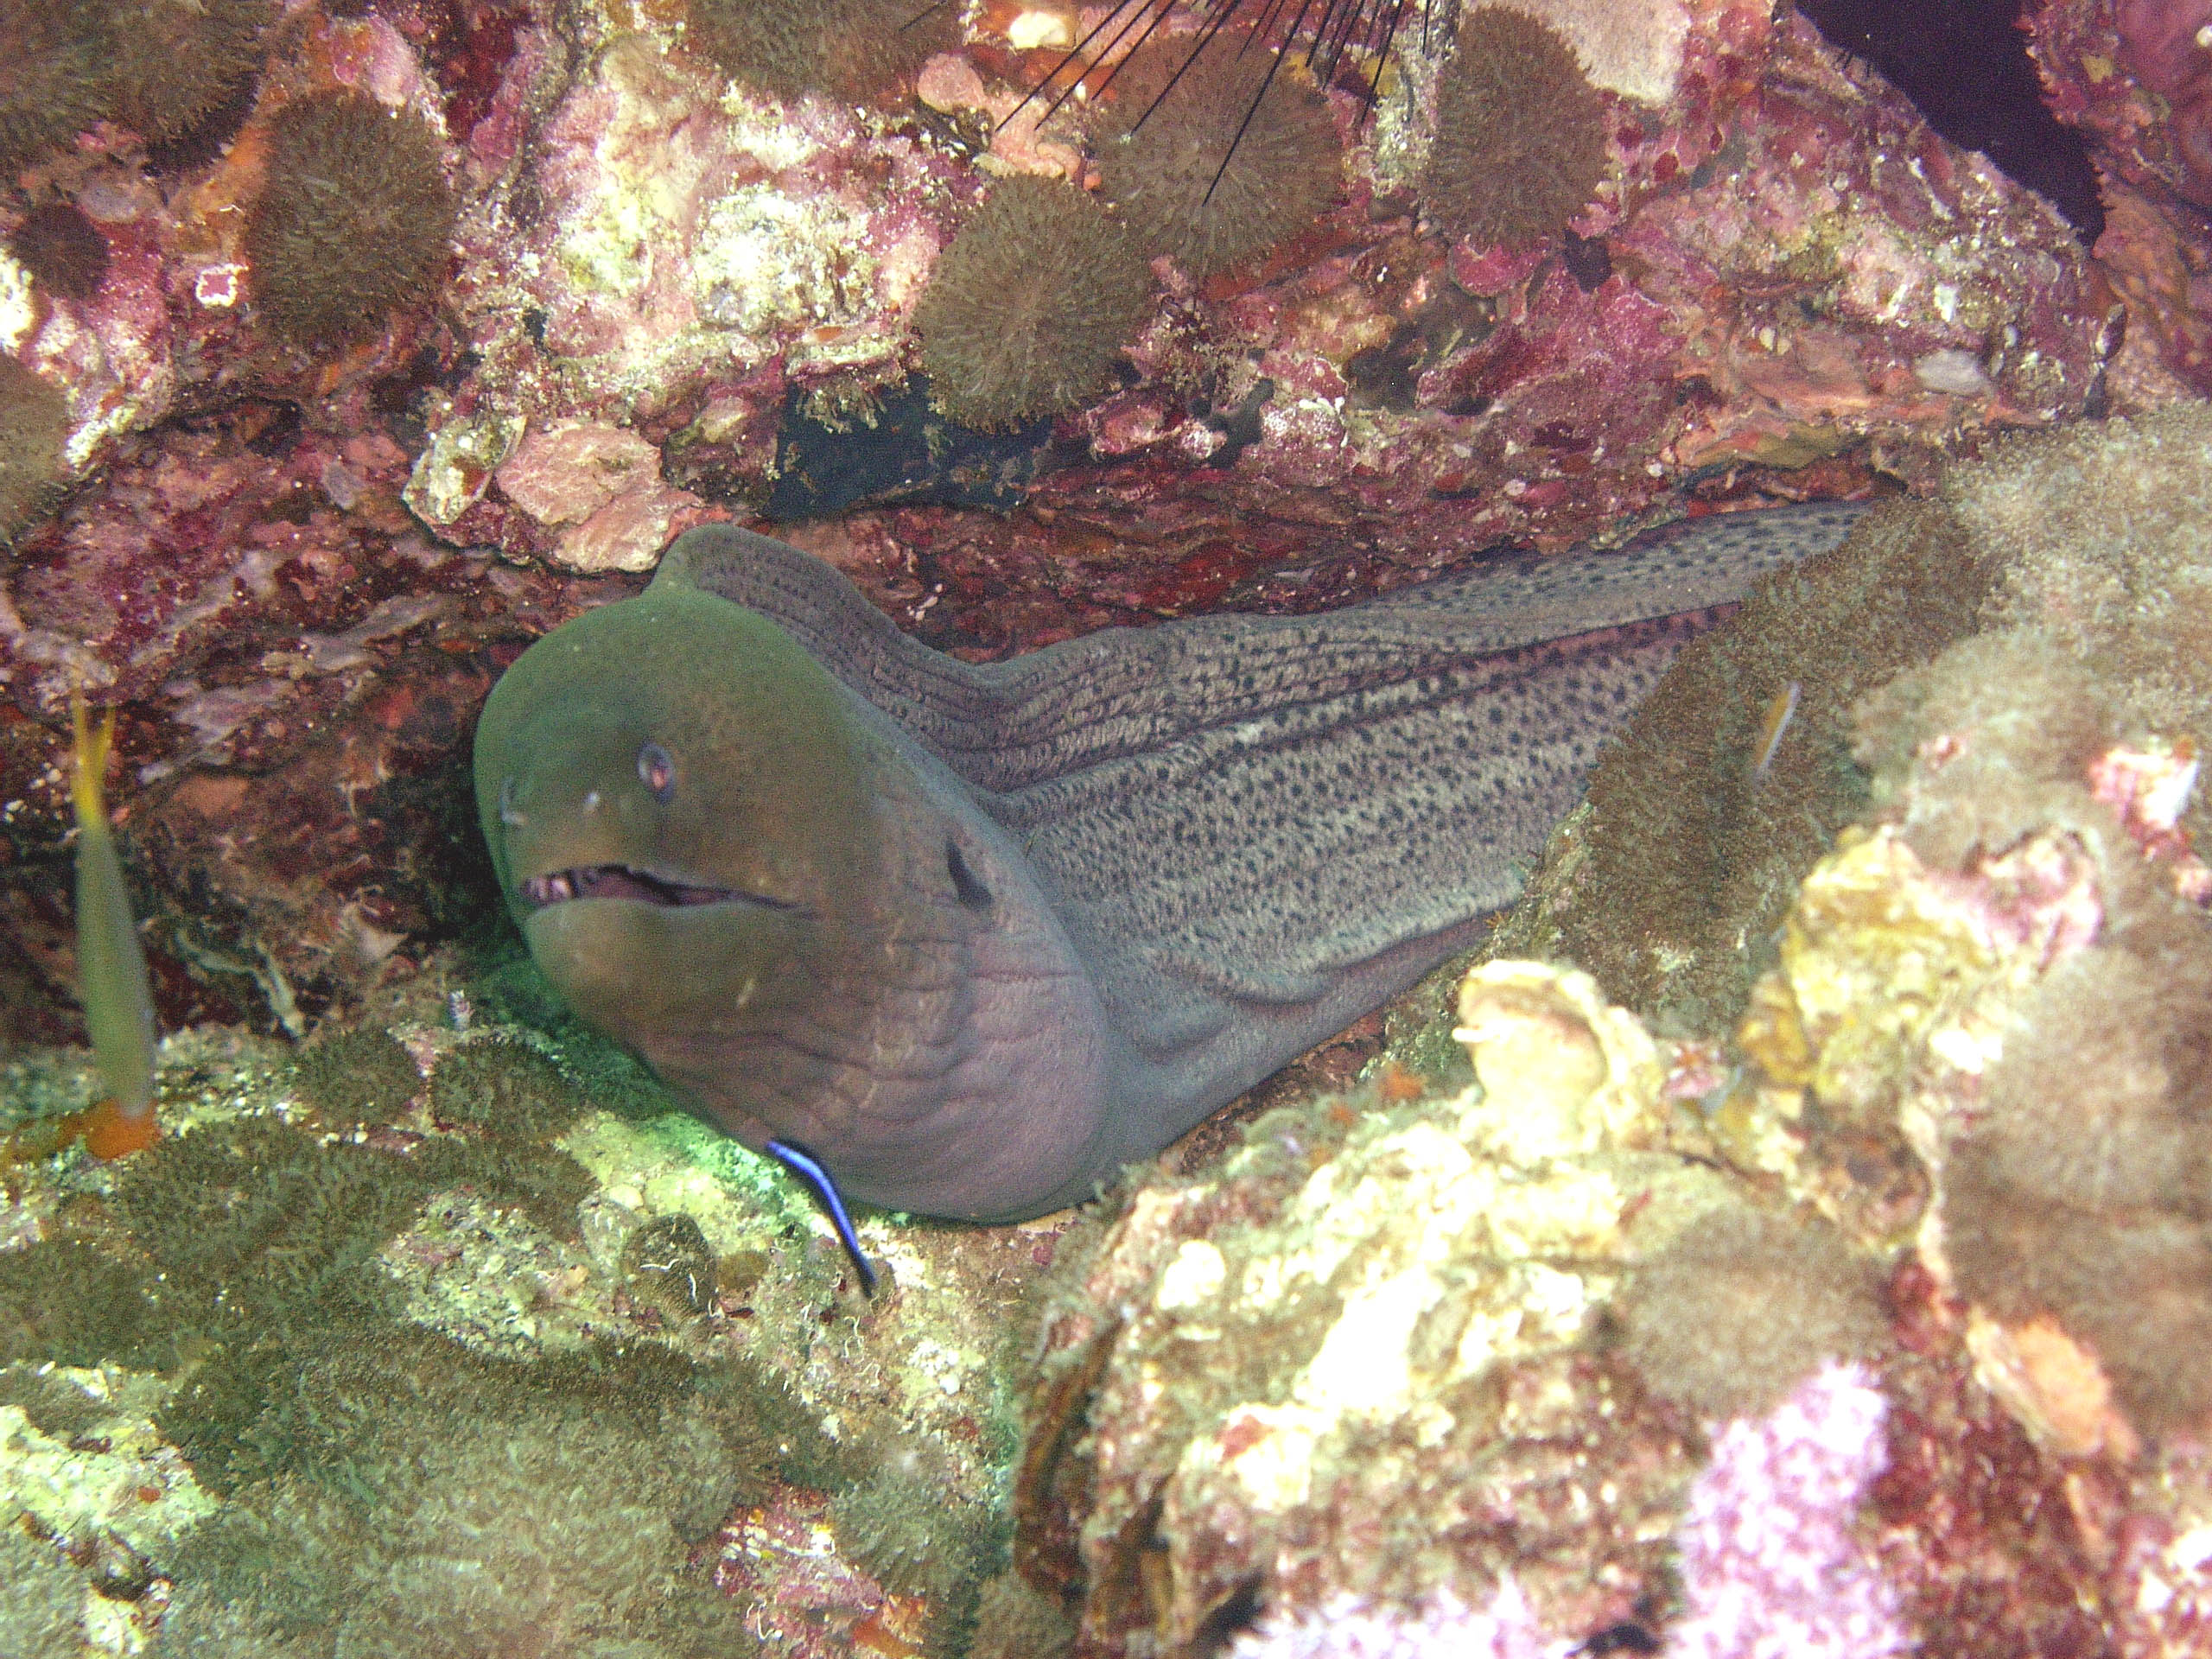 Eel_and_wrasse_3